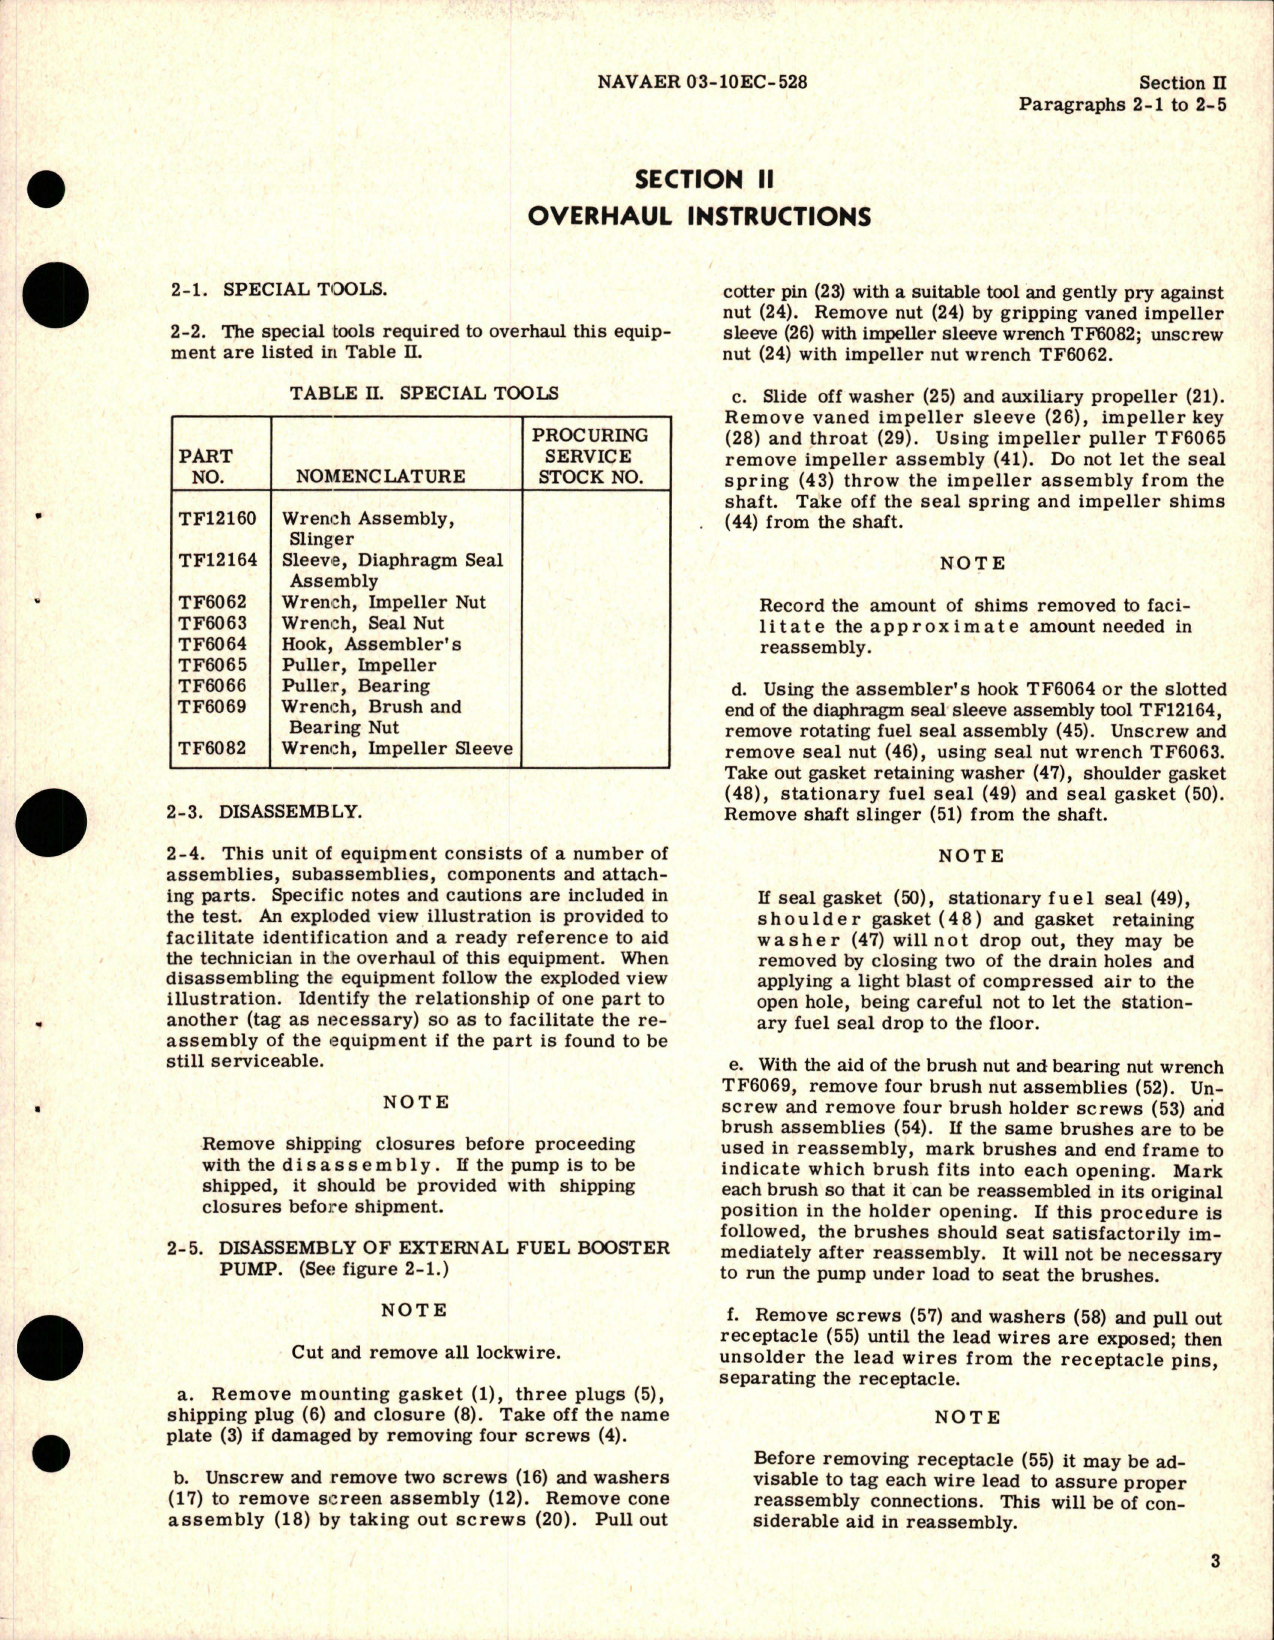 Sample page 5 from AirCorps Library document: Overhaul Instructions for External Fuel Booster Pumps